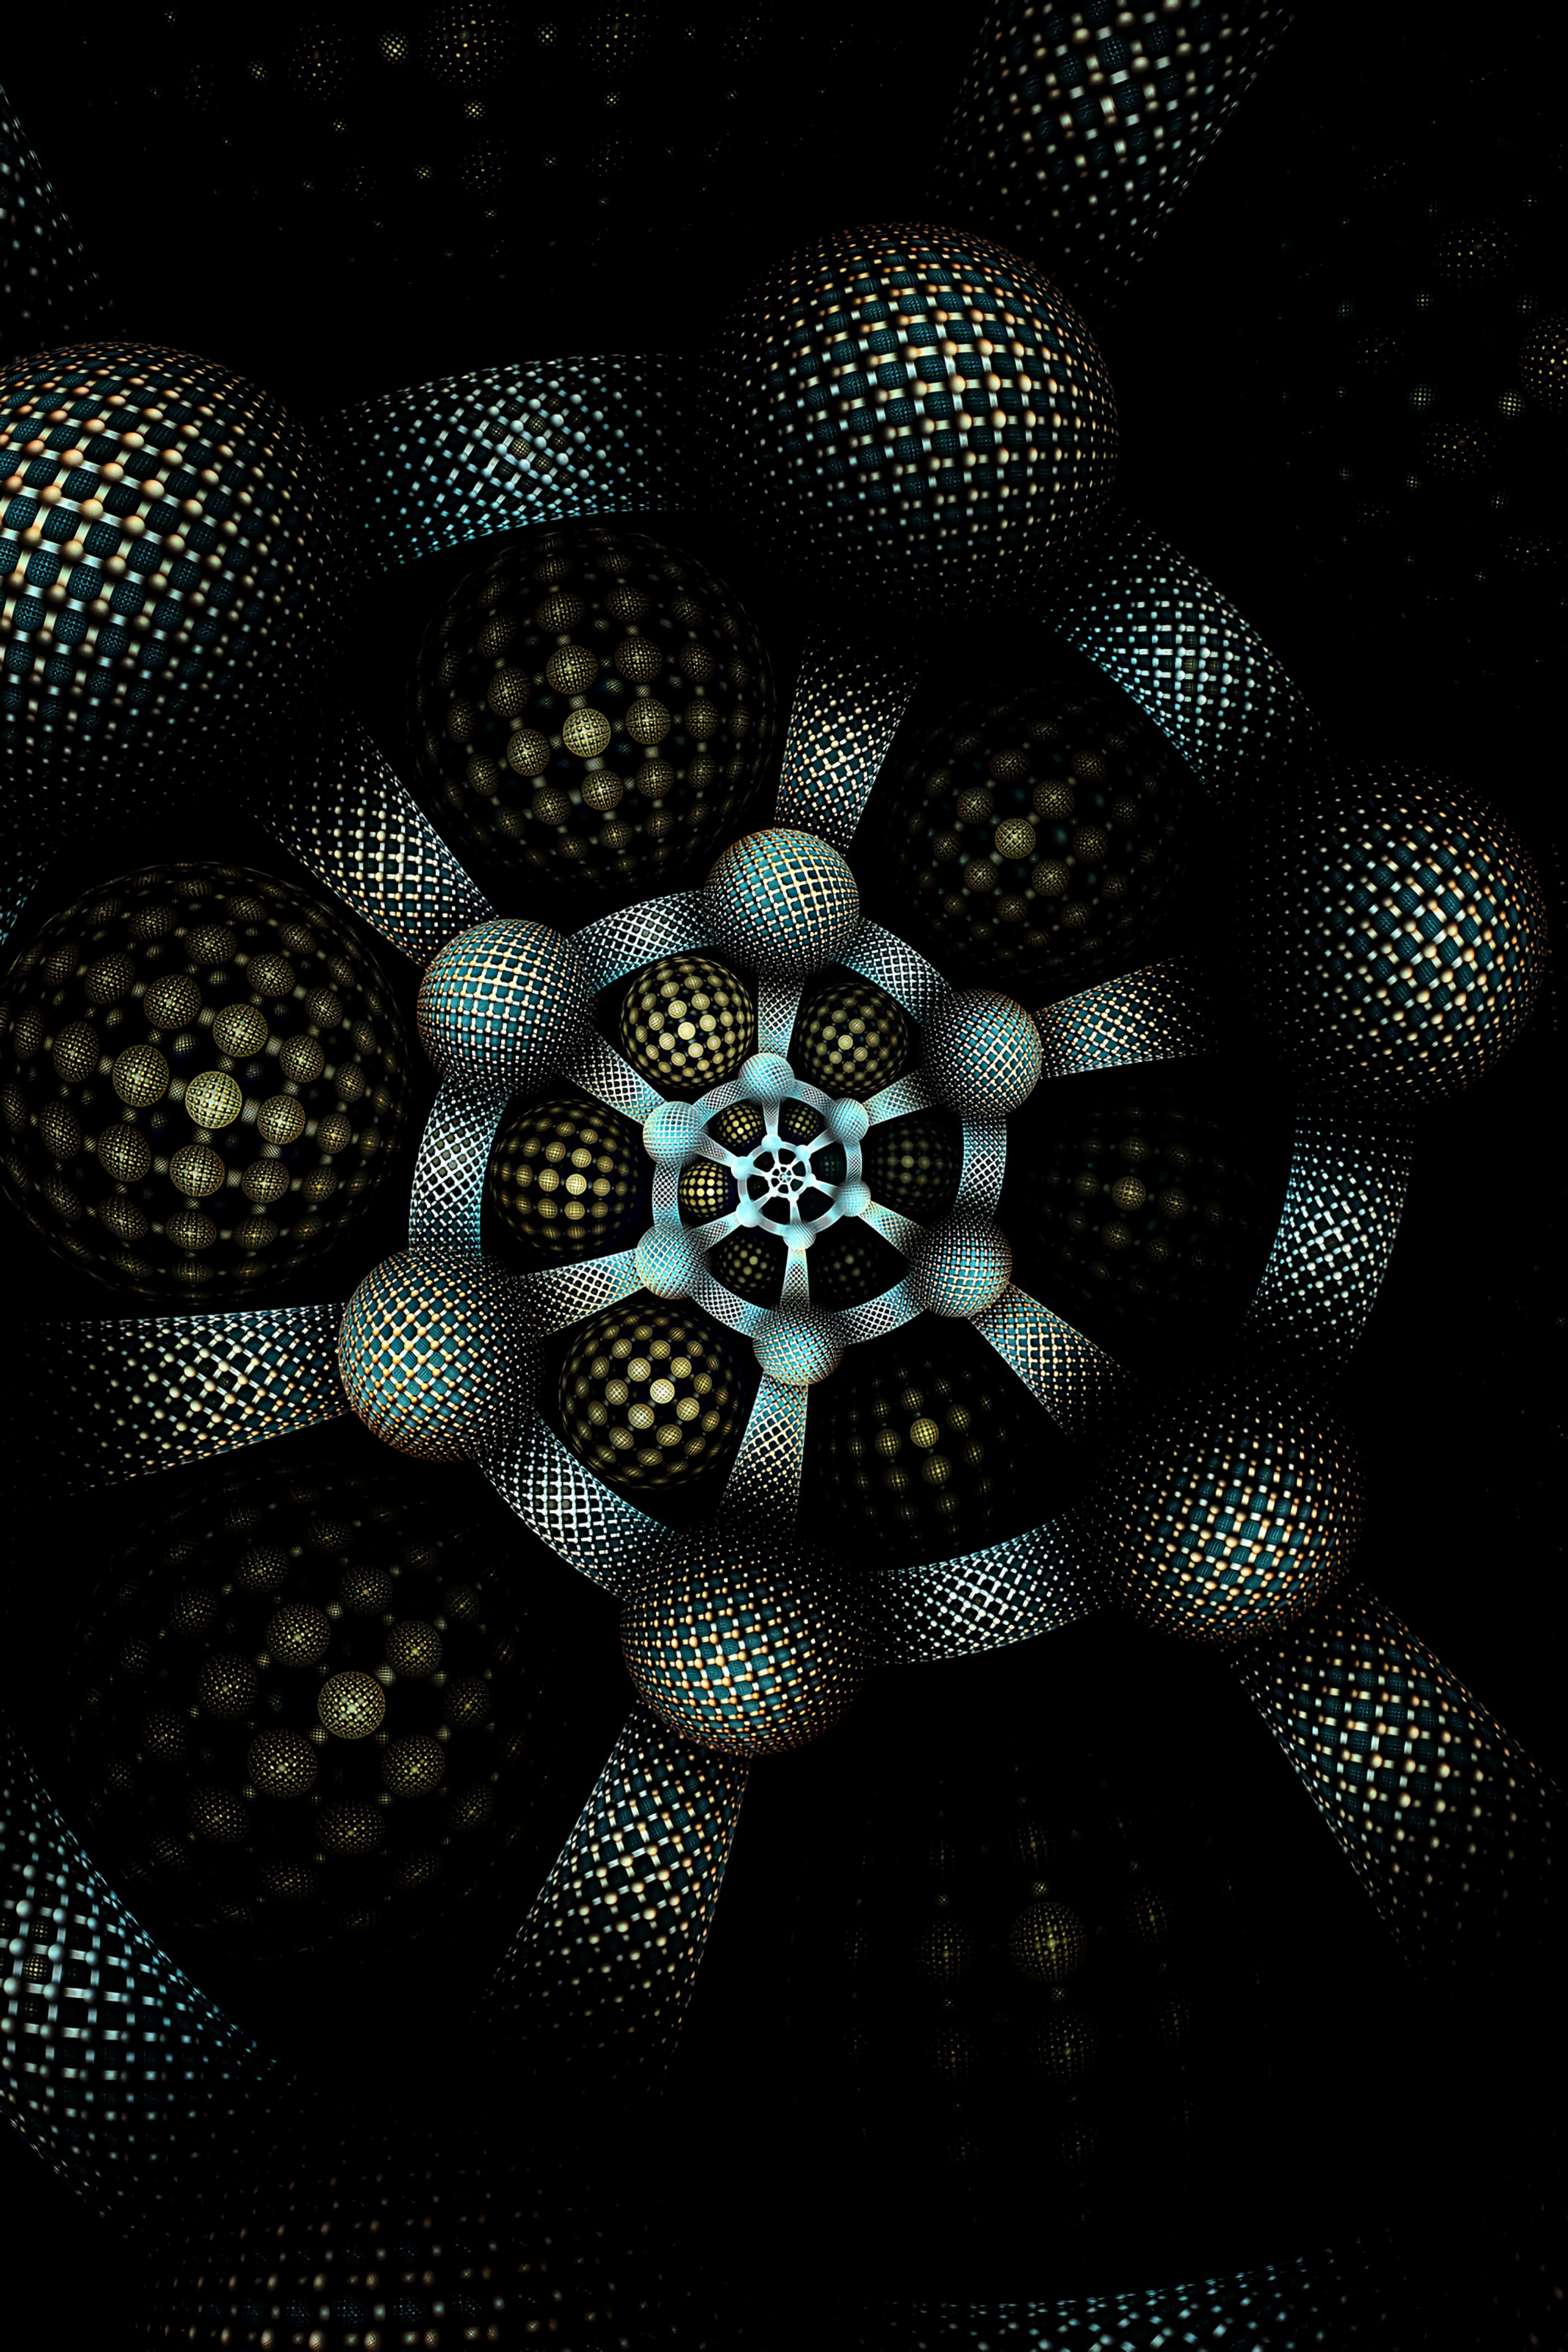 form, abstract, dark, circles, pattern, fractal, swirling, involute Full HD